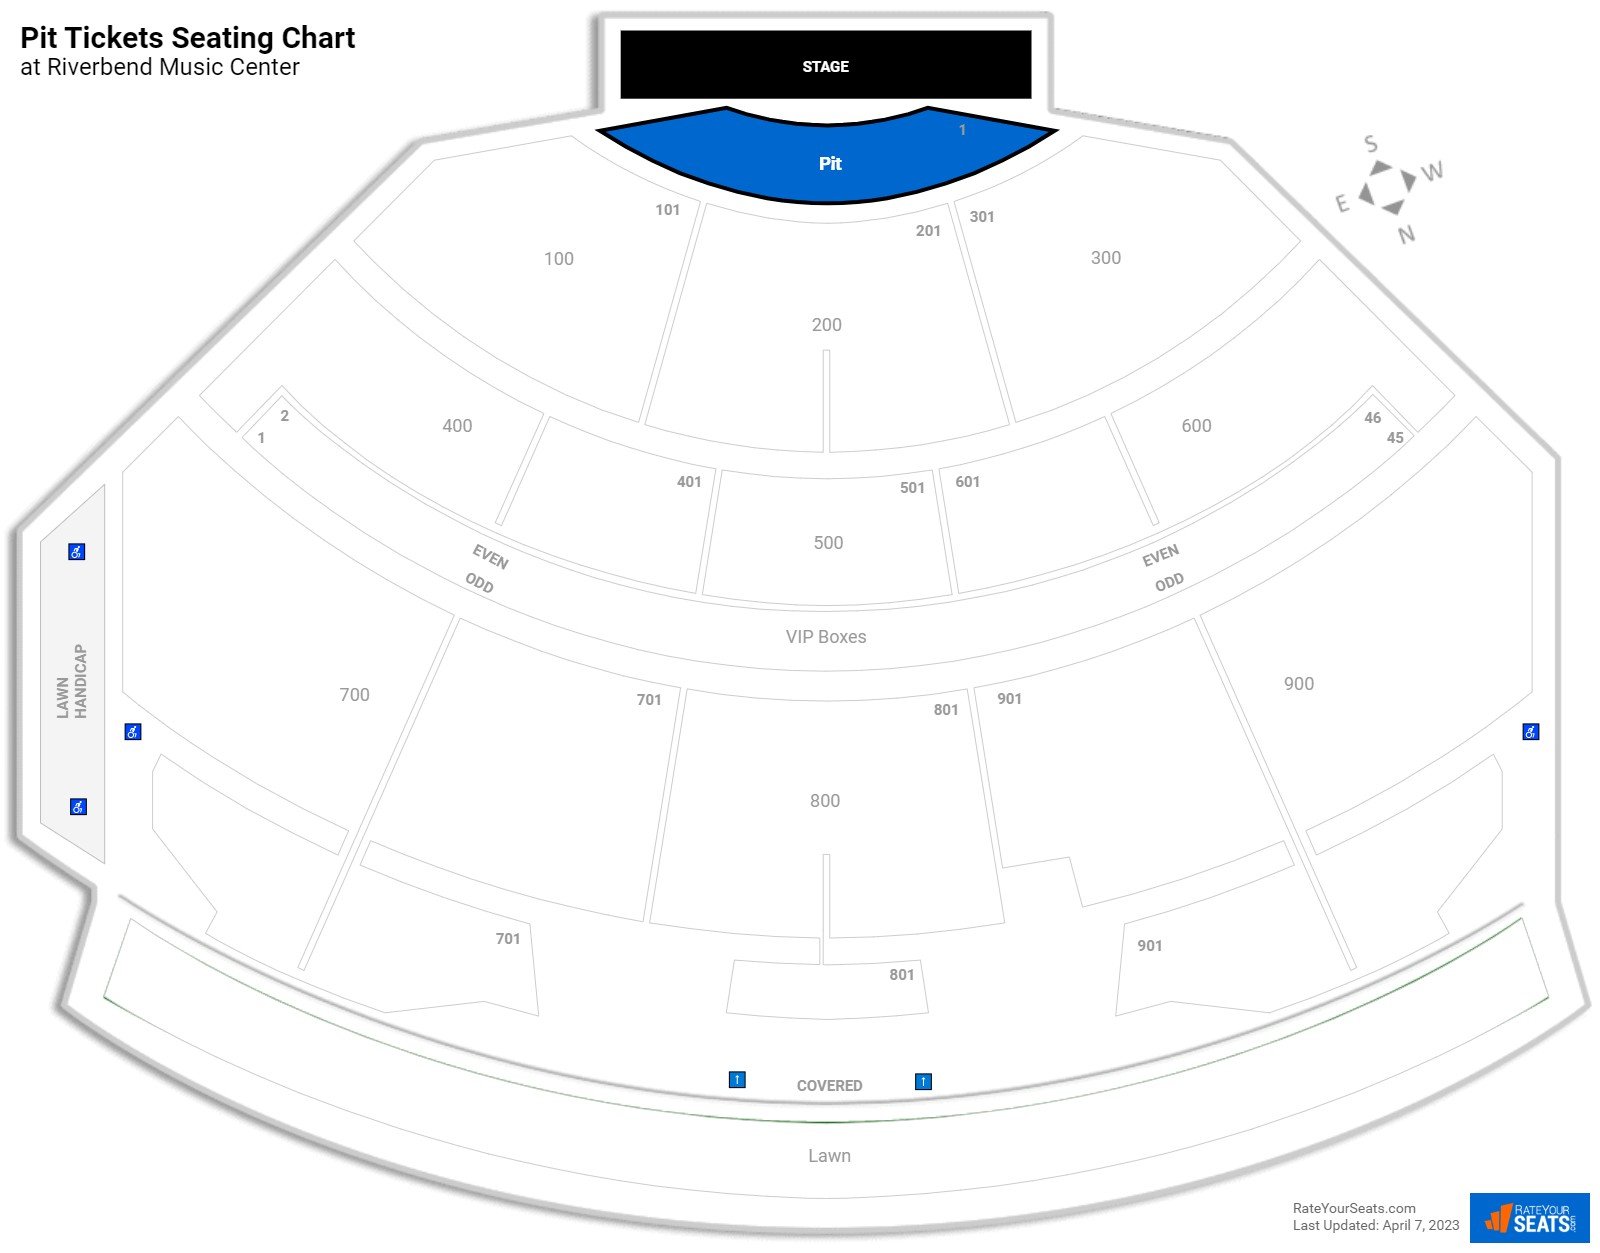 Concert Pit Tickets Seating Chart at Riverbend Music Center